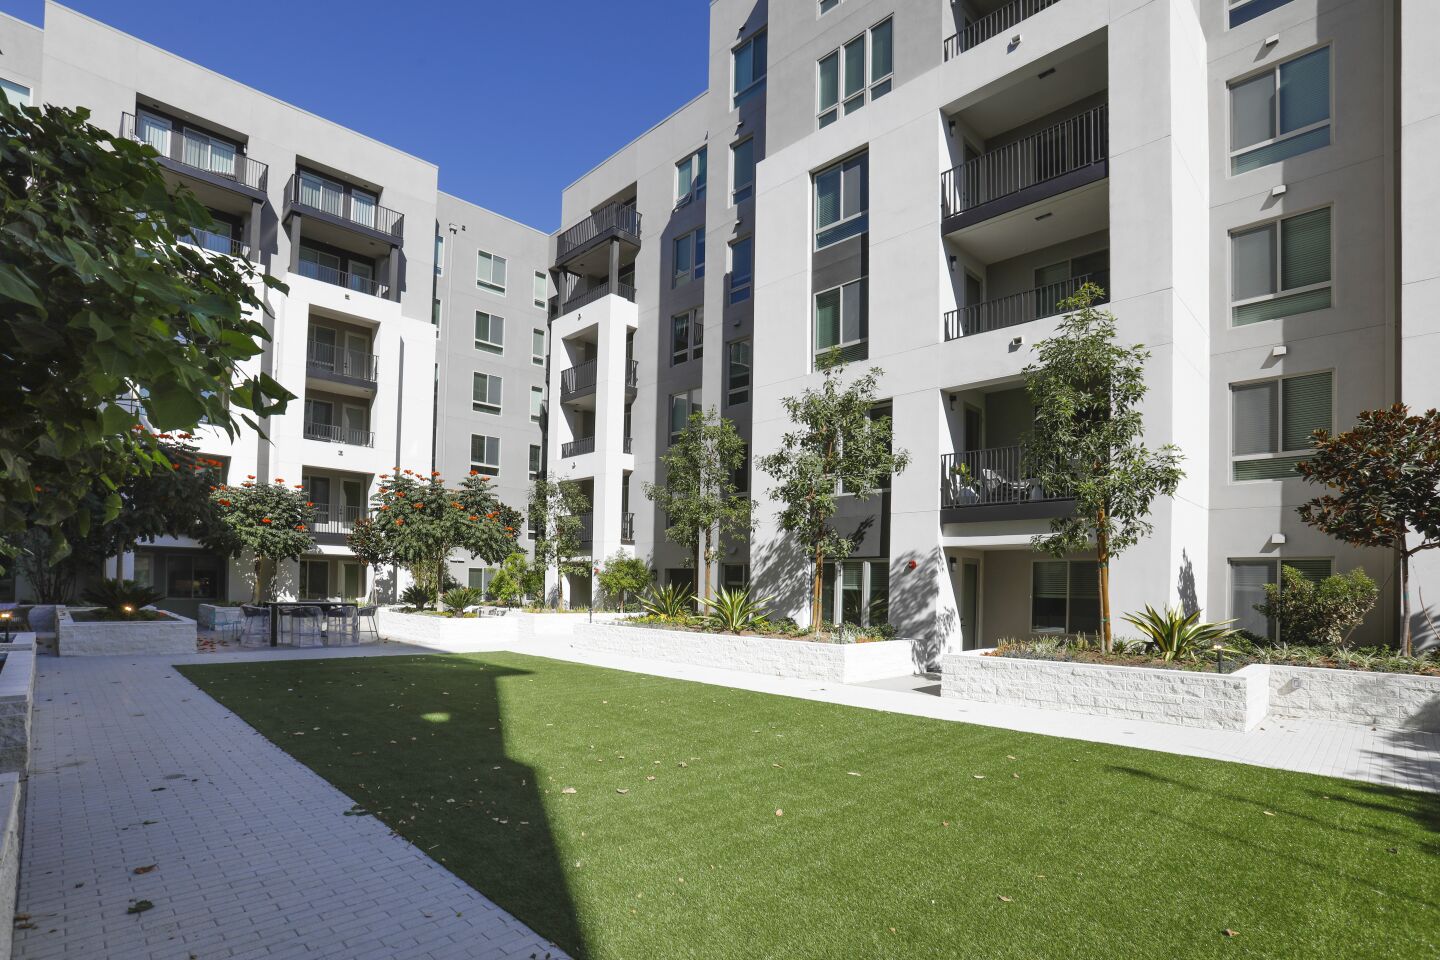 The first courtyard completed at One Paseo, the upscale apartment homes project in Carmel Valley, part of the 23-acre mixed-use project. Photographed October 8, 2019, in San Diego, California.